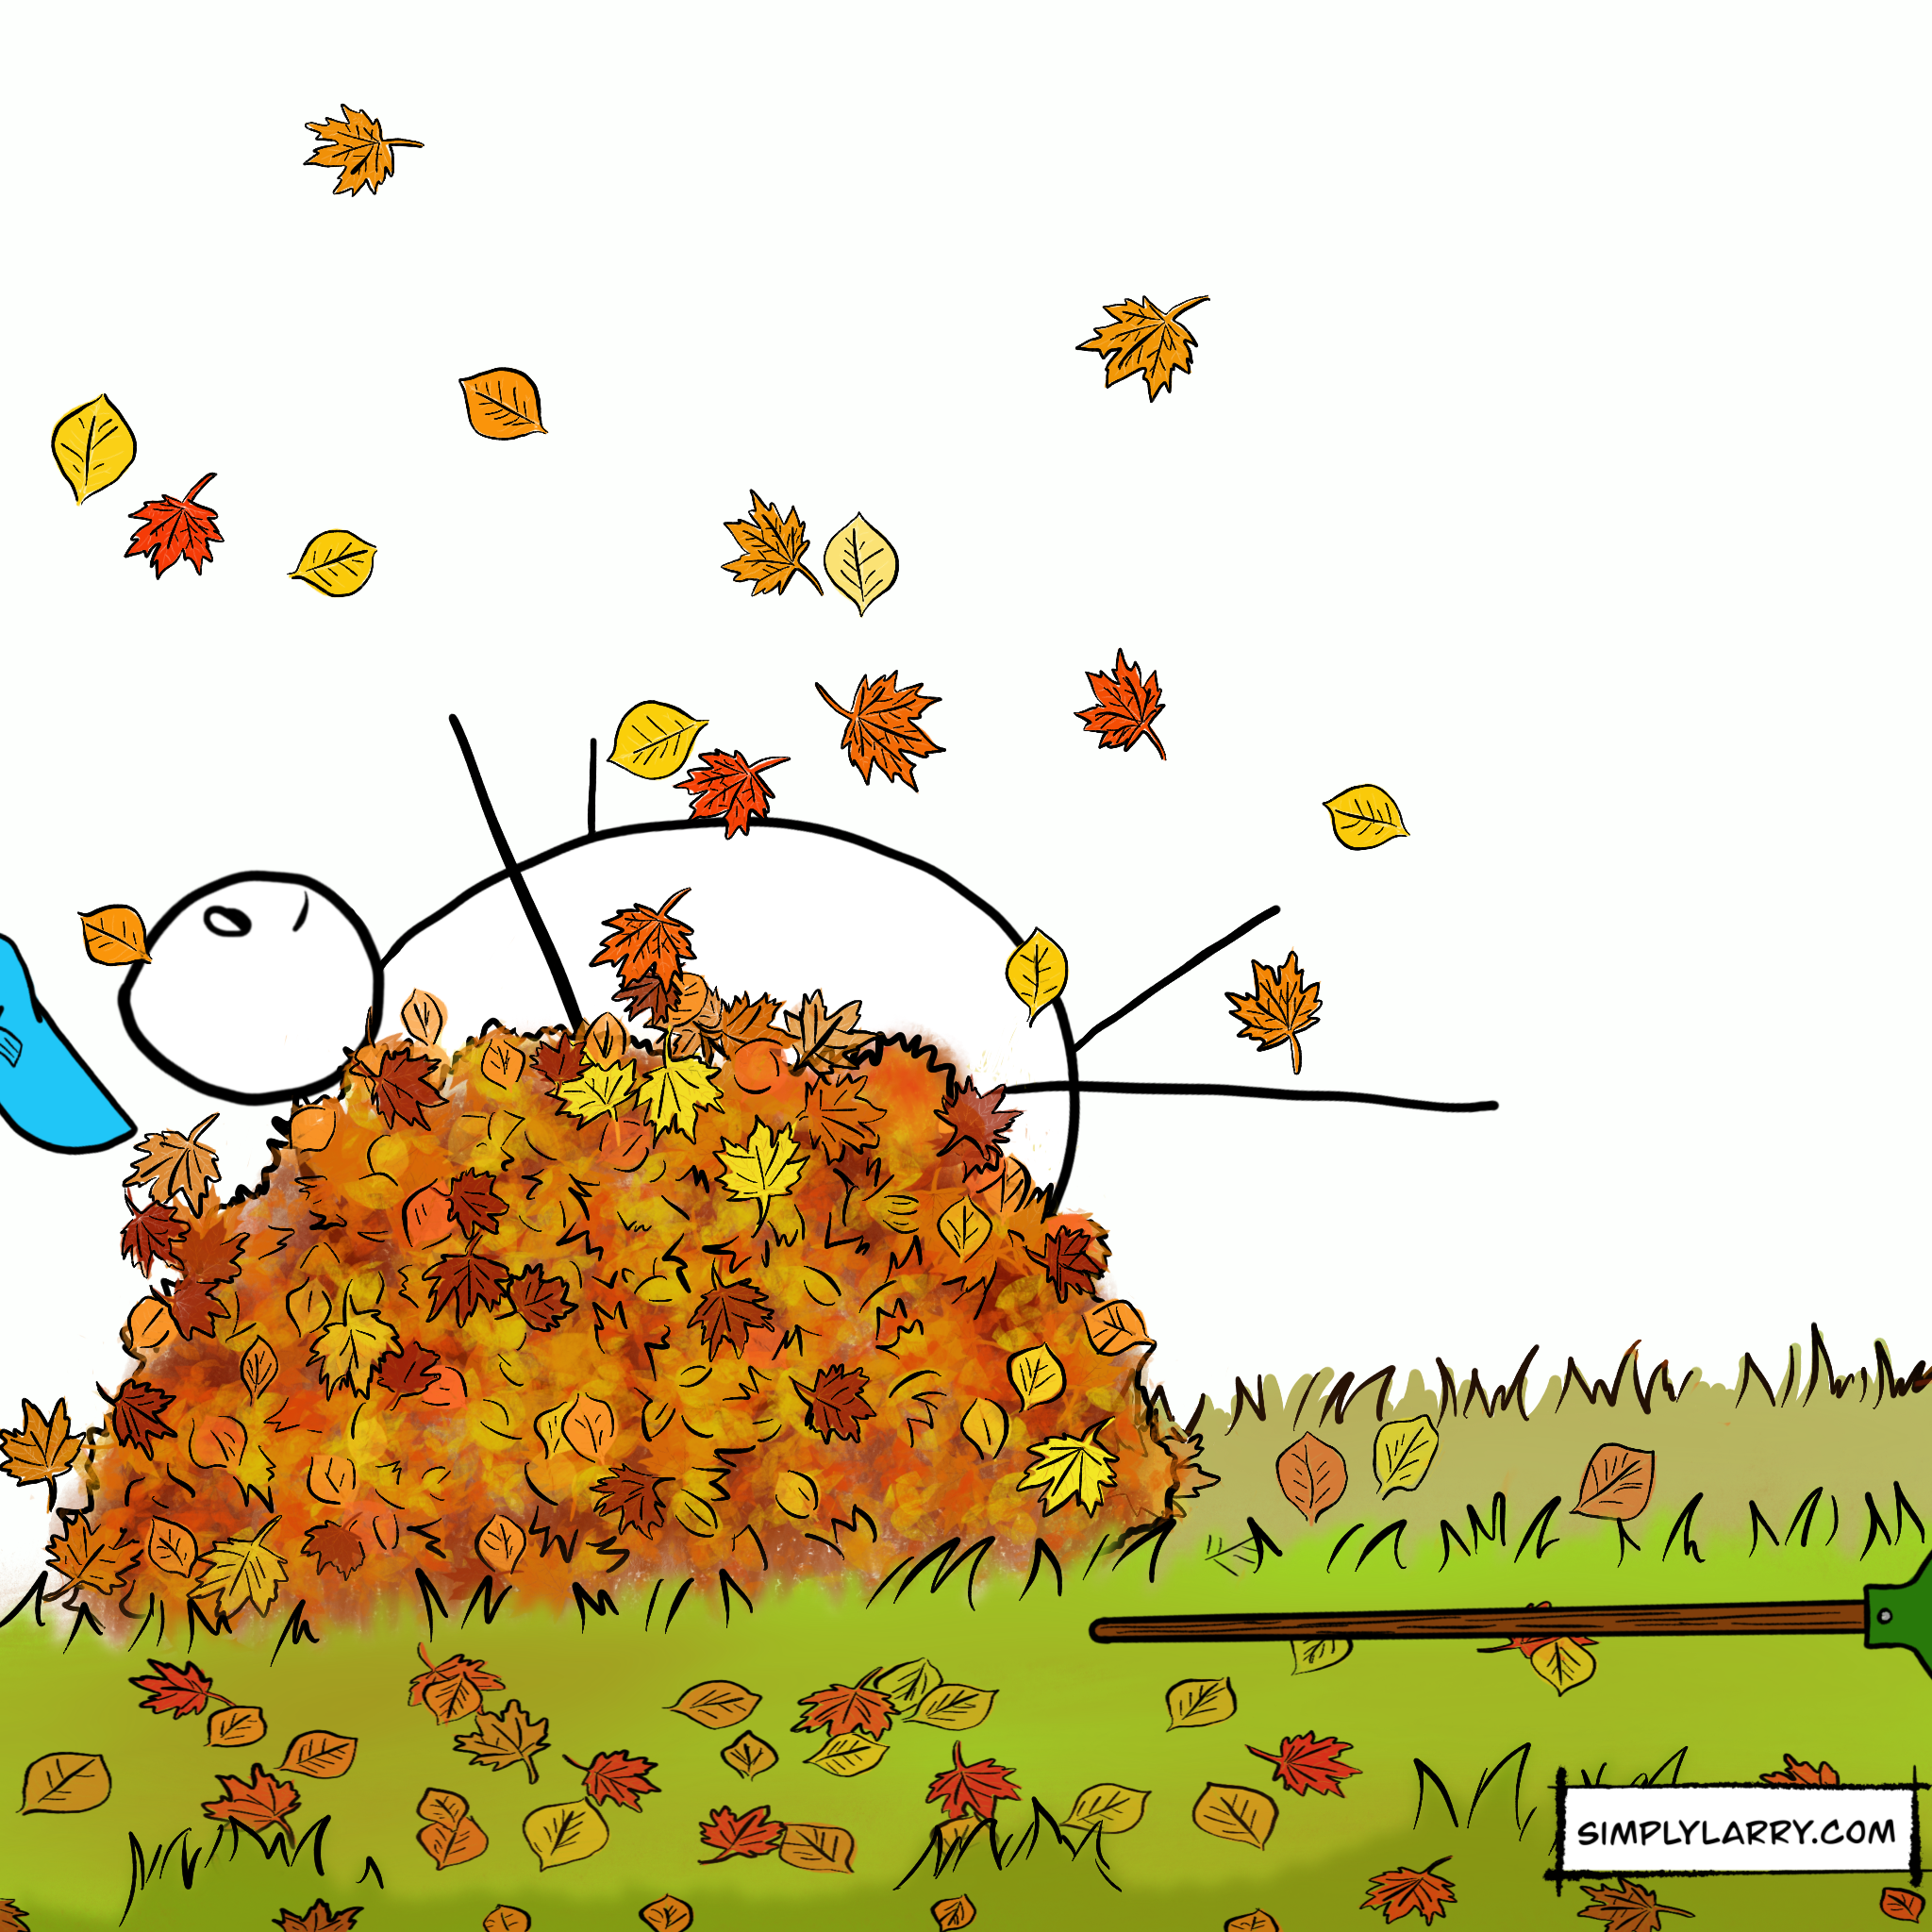 You are currently viewing 36 – Larry Jumps into the Leaf Pile